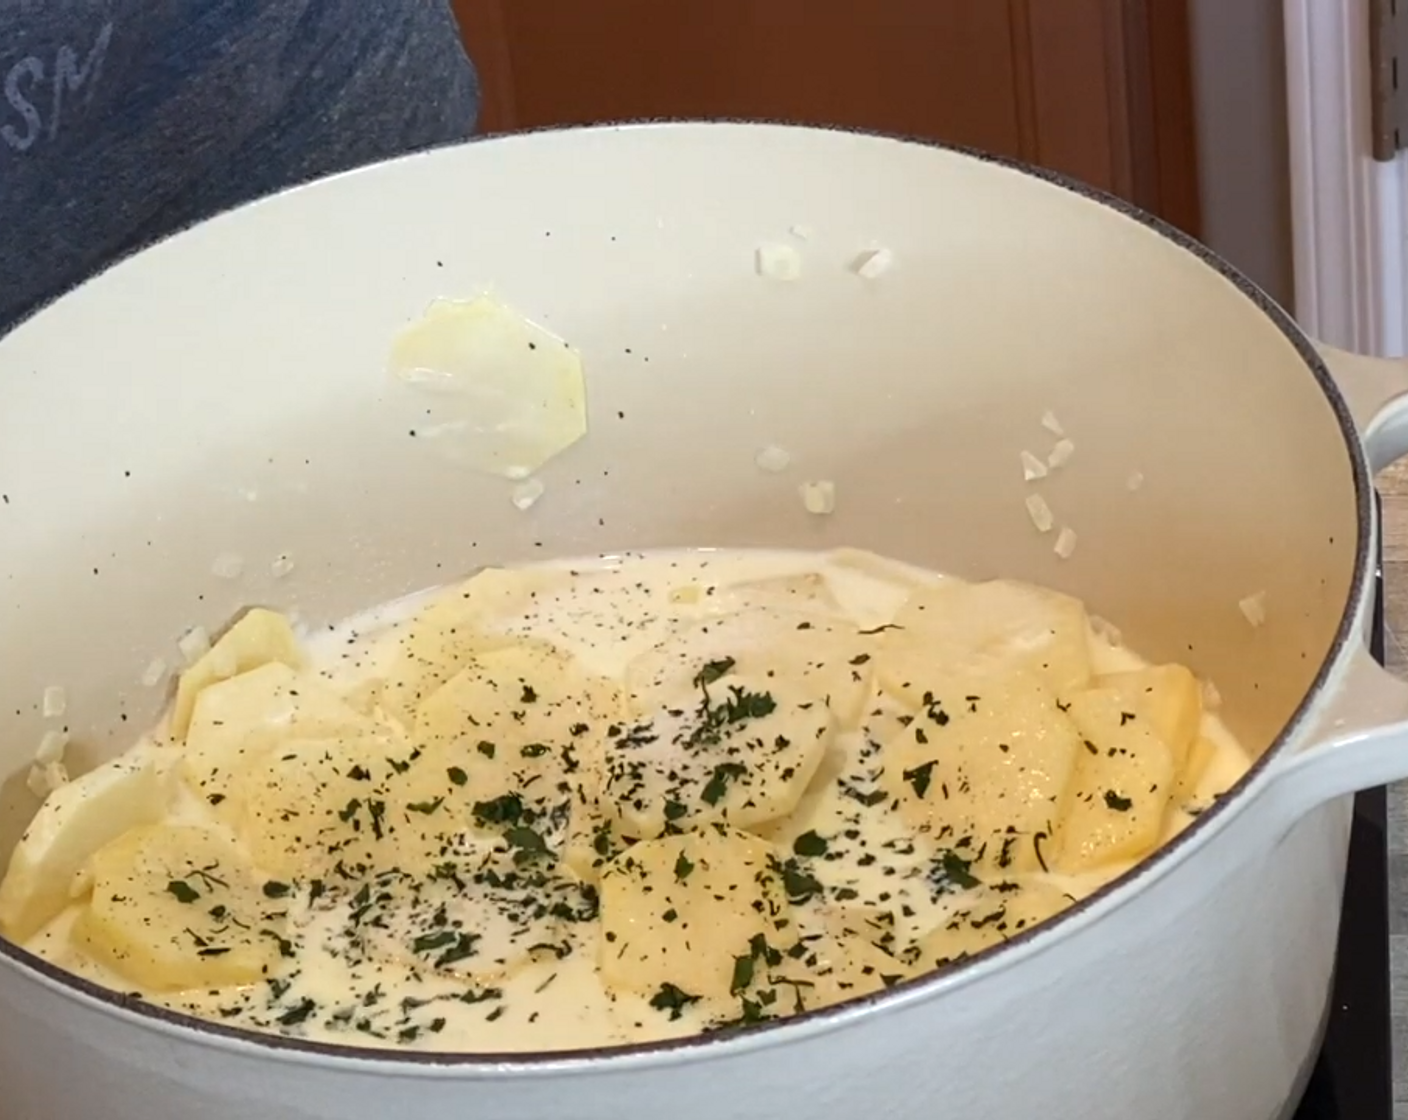 step 3 Stir in Potatoes (2 lb), Heavy Cream (1 cup), Milk (1 1/2 cups), Salt (1/2 Tbsp), Ground Black Pepper (1/4 tsp), and Fresh Parsley (1/4 cup); bring to a boil. Reduce heat to medium-low and cook, stirring gently, 10-15 minutes or until potatoes are tender.